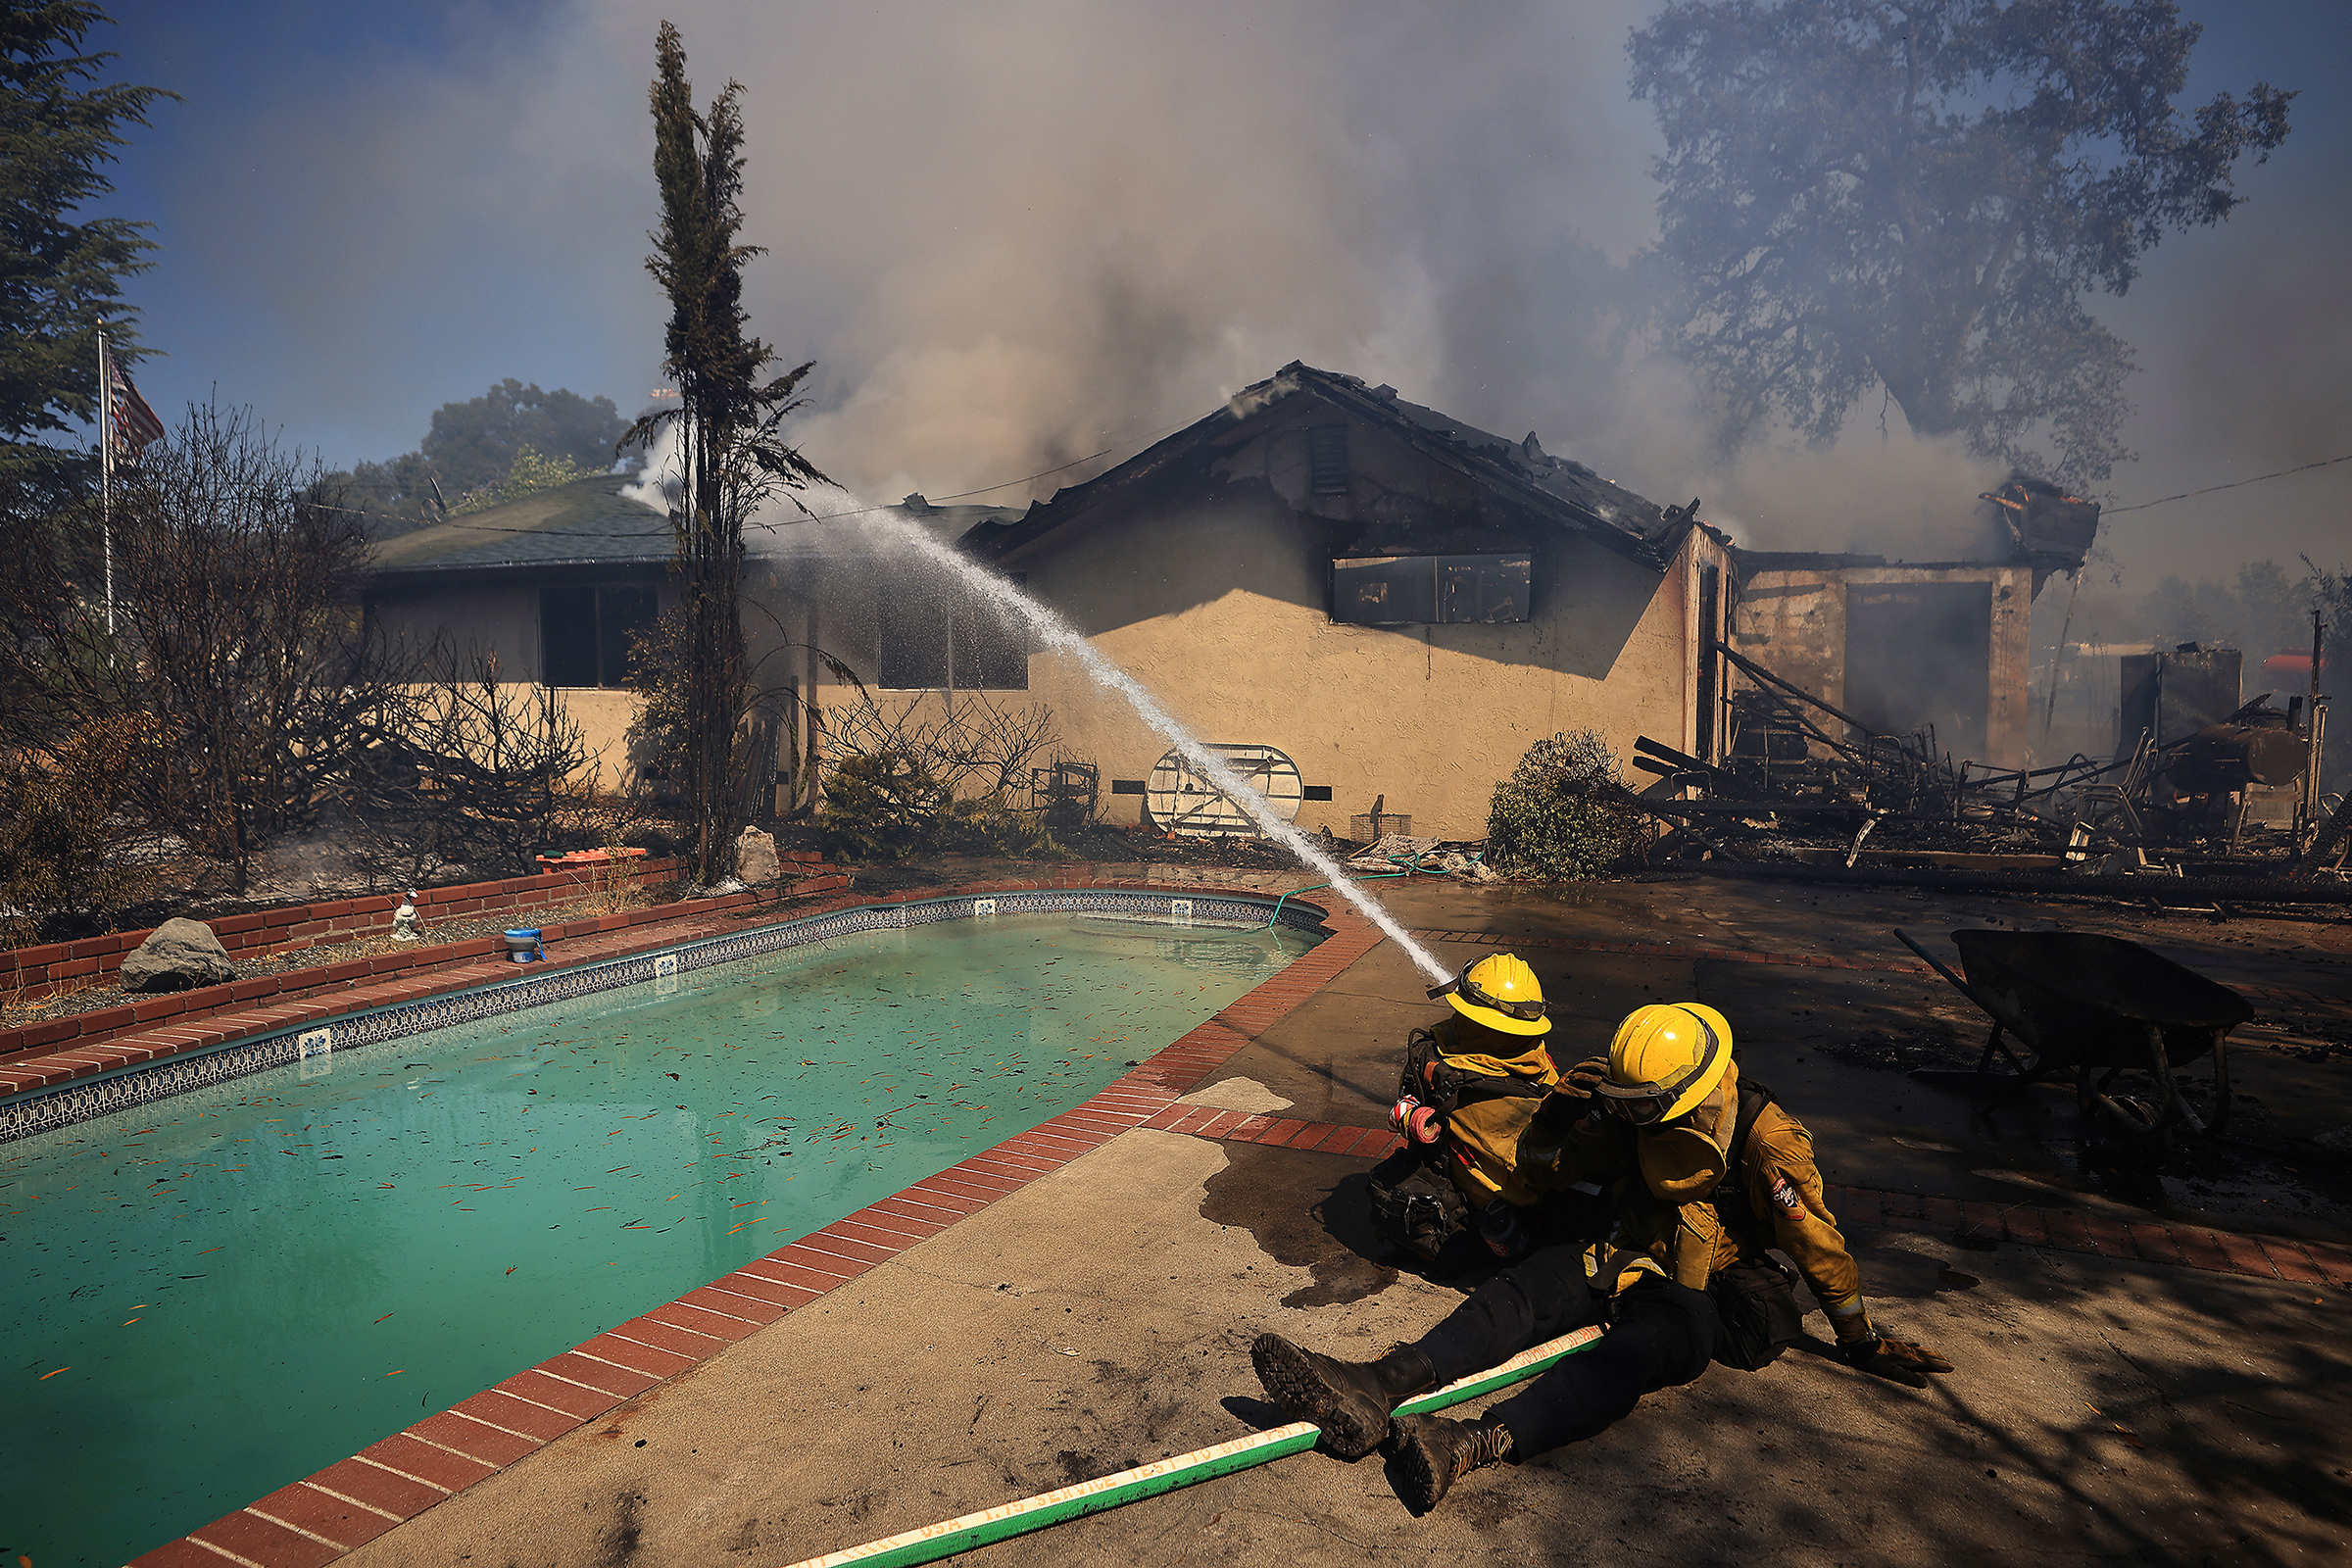 Firefighters take a defensive stand against a home burning in Redwood Valley, Calif., ignited by an 80 acre wind whipped brush fire fed by tinder dry conditions, on July 7.